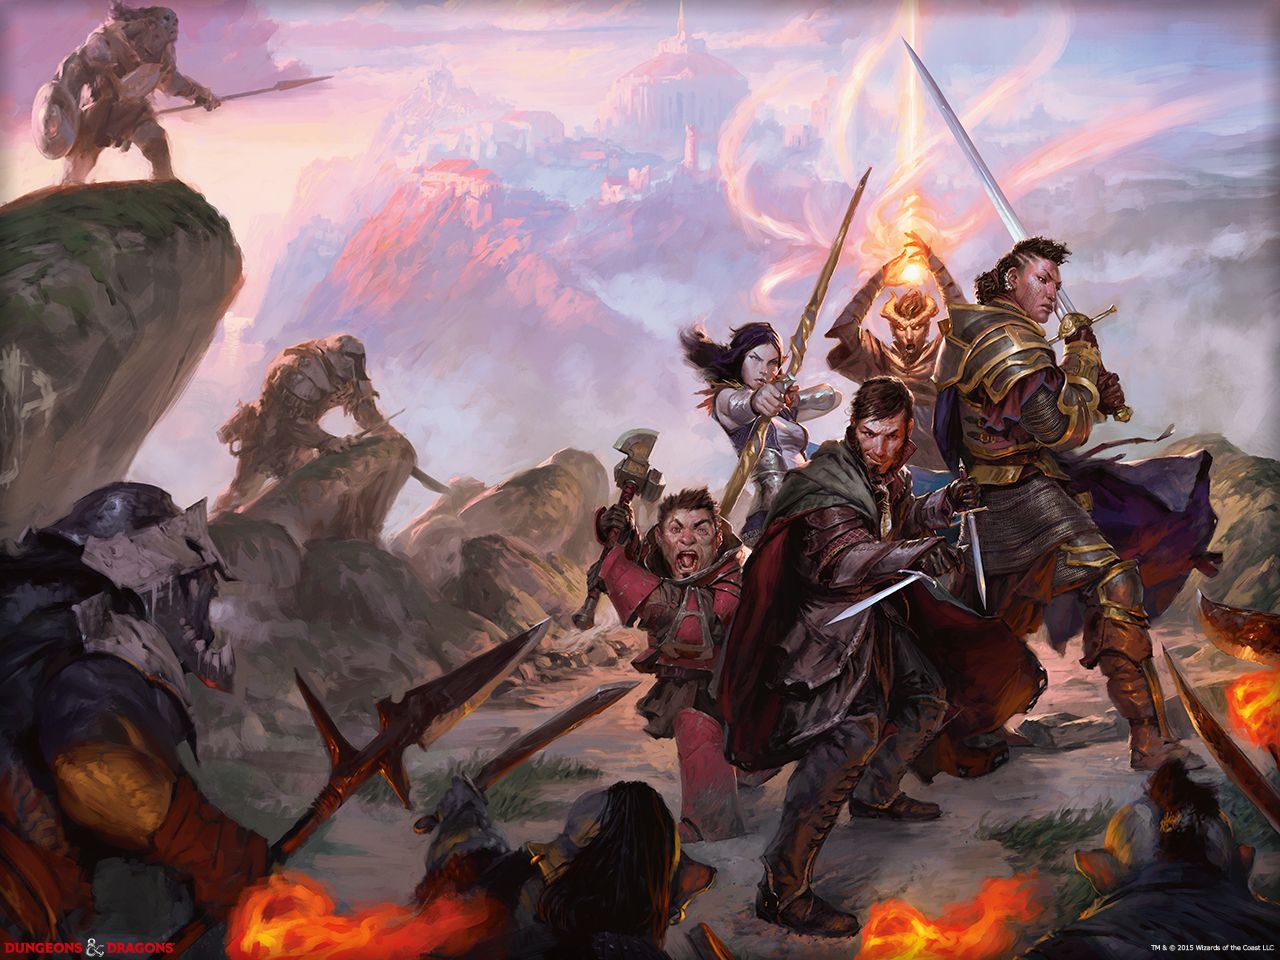 Official Dungeons & Dragons Wallpaper showing Adventurers surrounded by foes